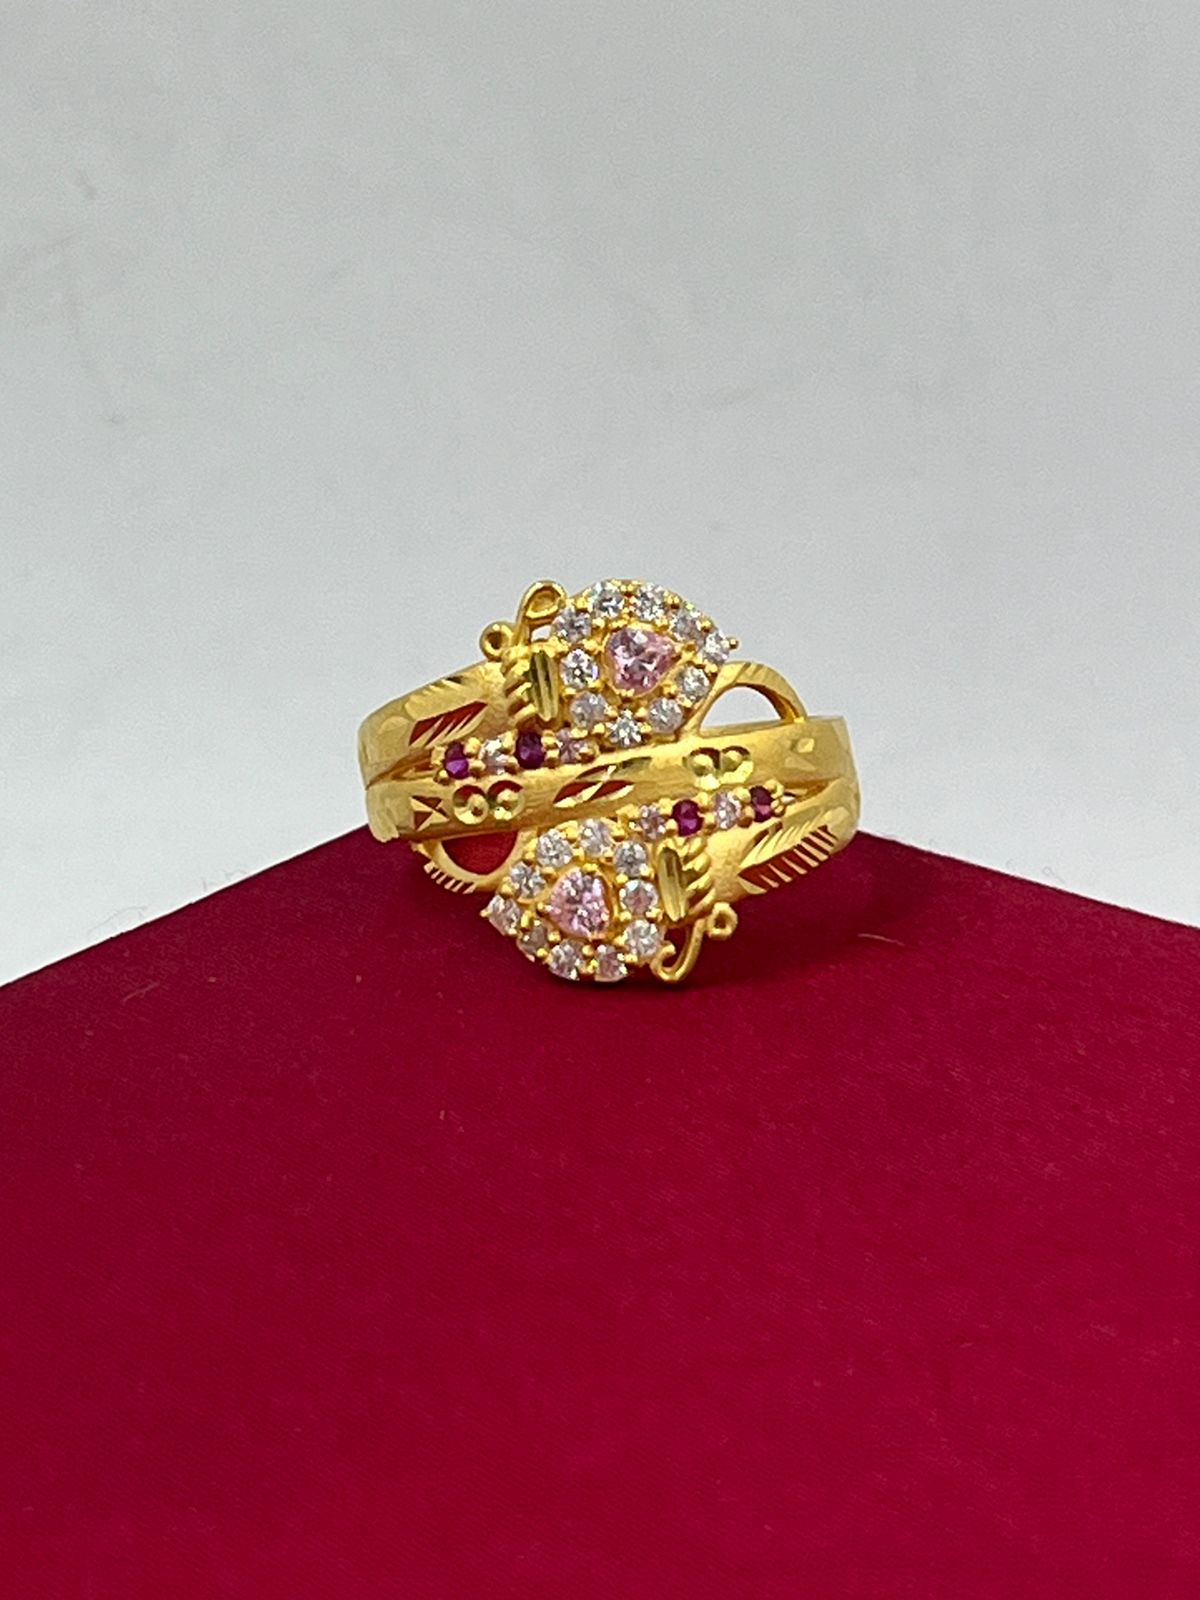 Latest Beautiful Gold Rings Designs Below 2 to 3 Grams With Weight & Price  || Shridhi Vlog | Beautiful gold rings, Gold ring designs, Ring designs